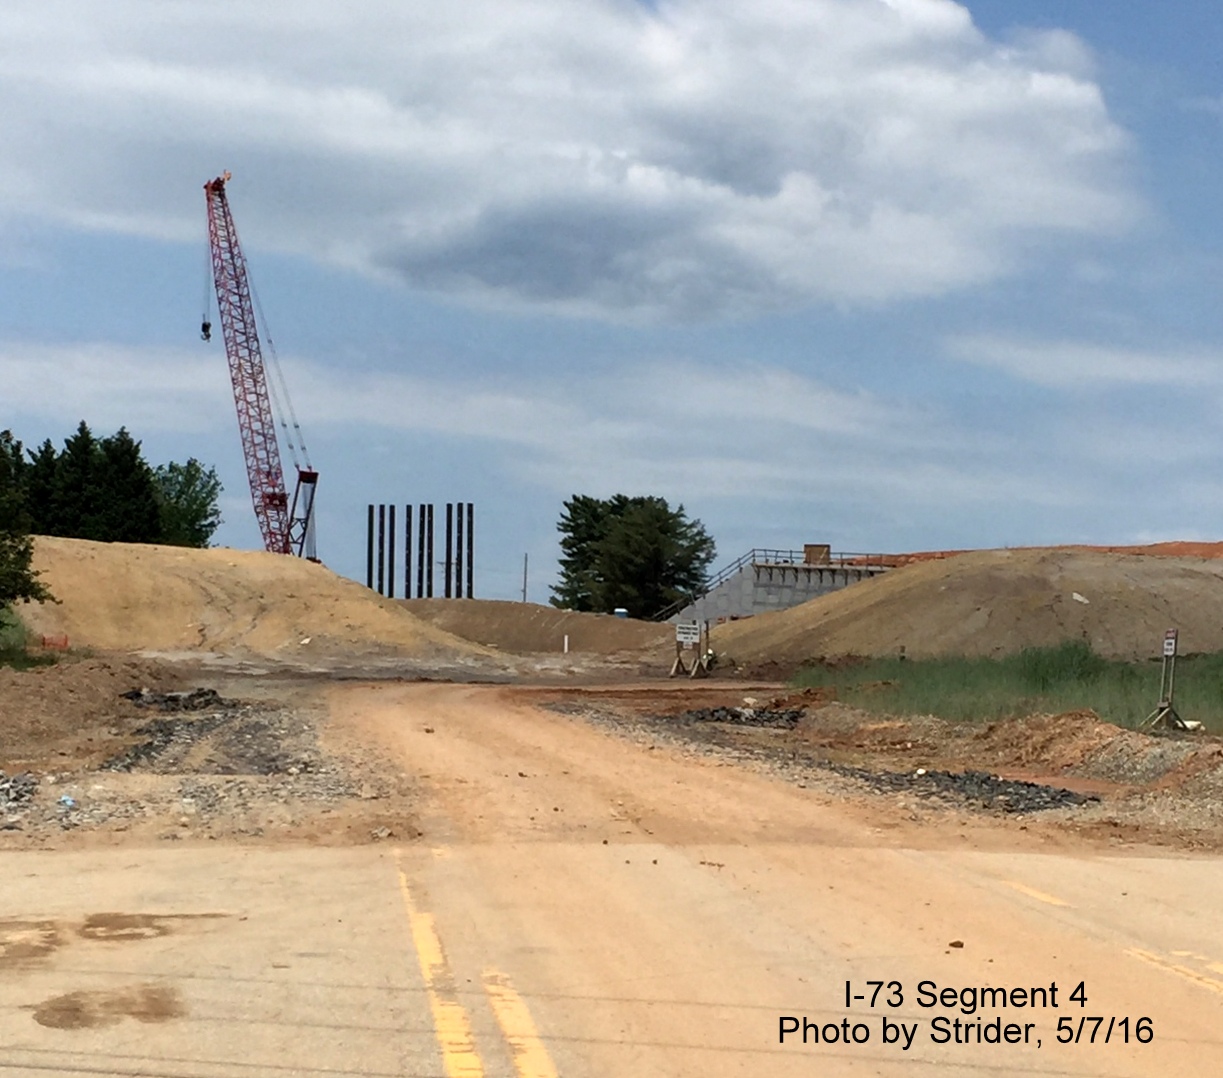 View from dead end of Regional Rd, showing equipment used for taxiway construction over Future I-73 lanes, from Strider